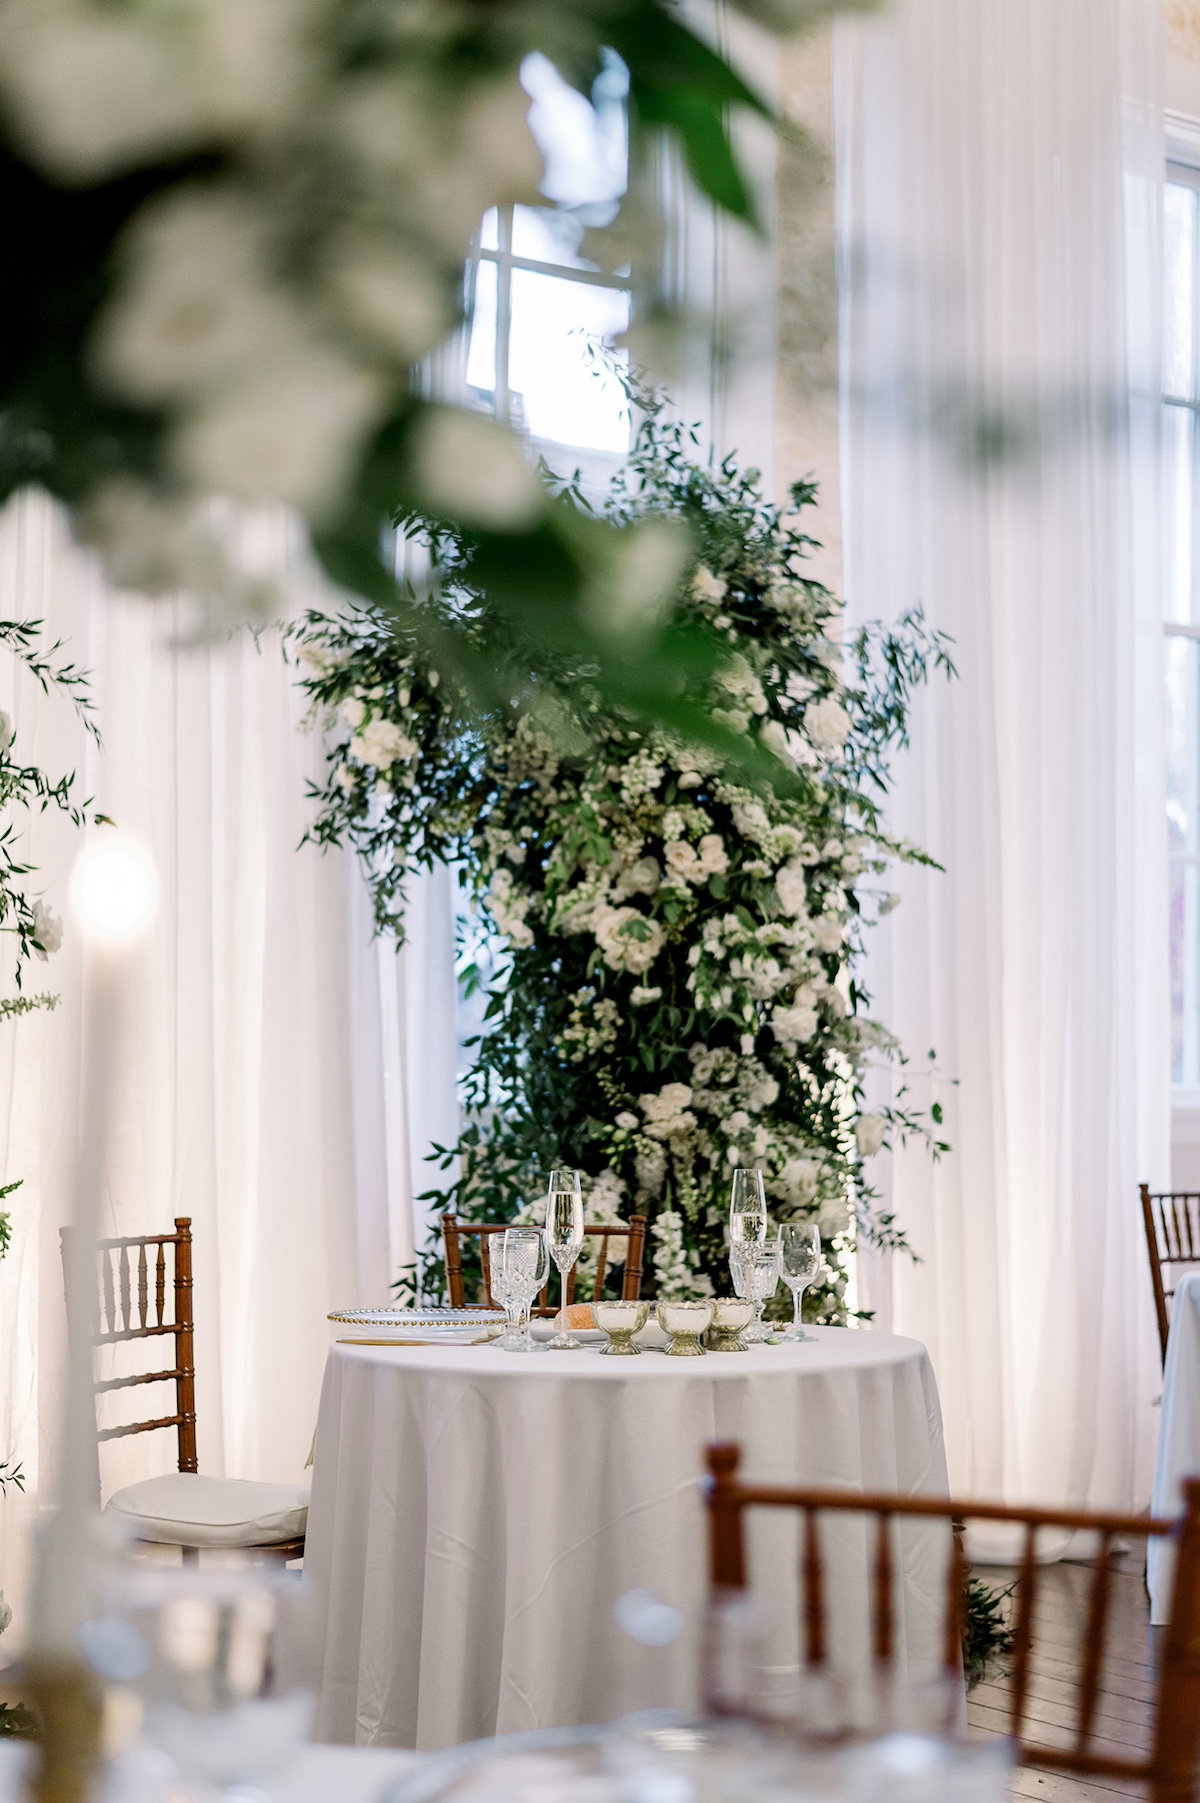 An editorial focus on draping and backdrop details, creating a high-end setting that adds a touch of luxury to the celebration.